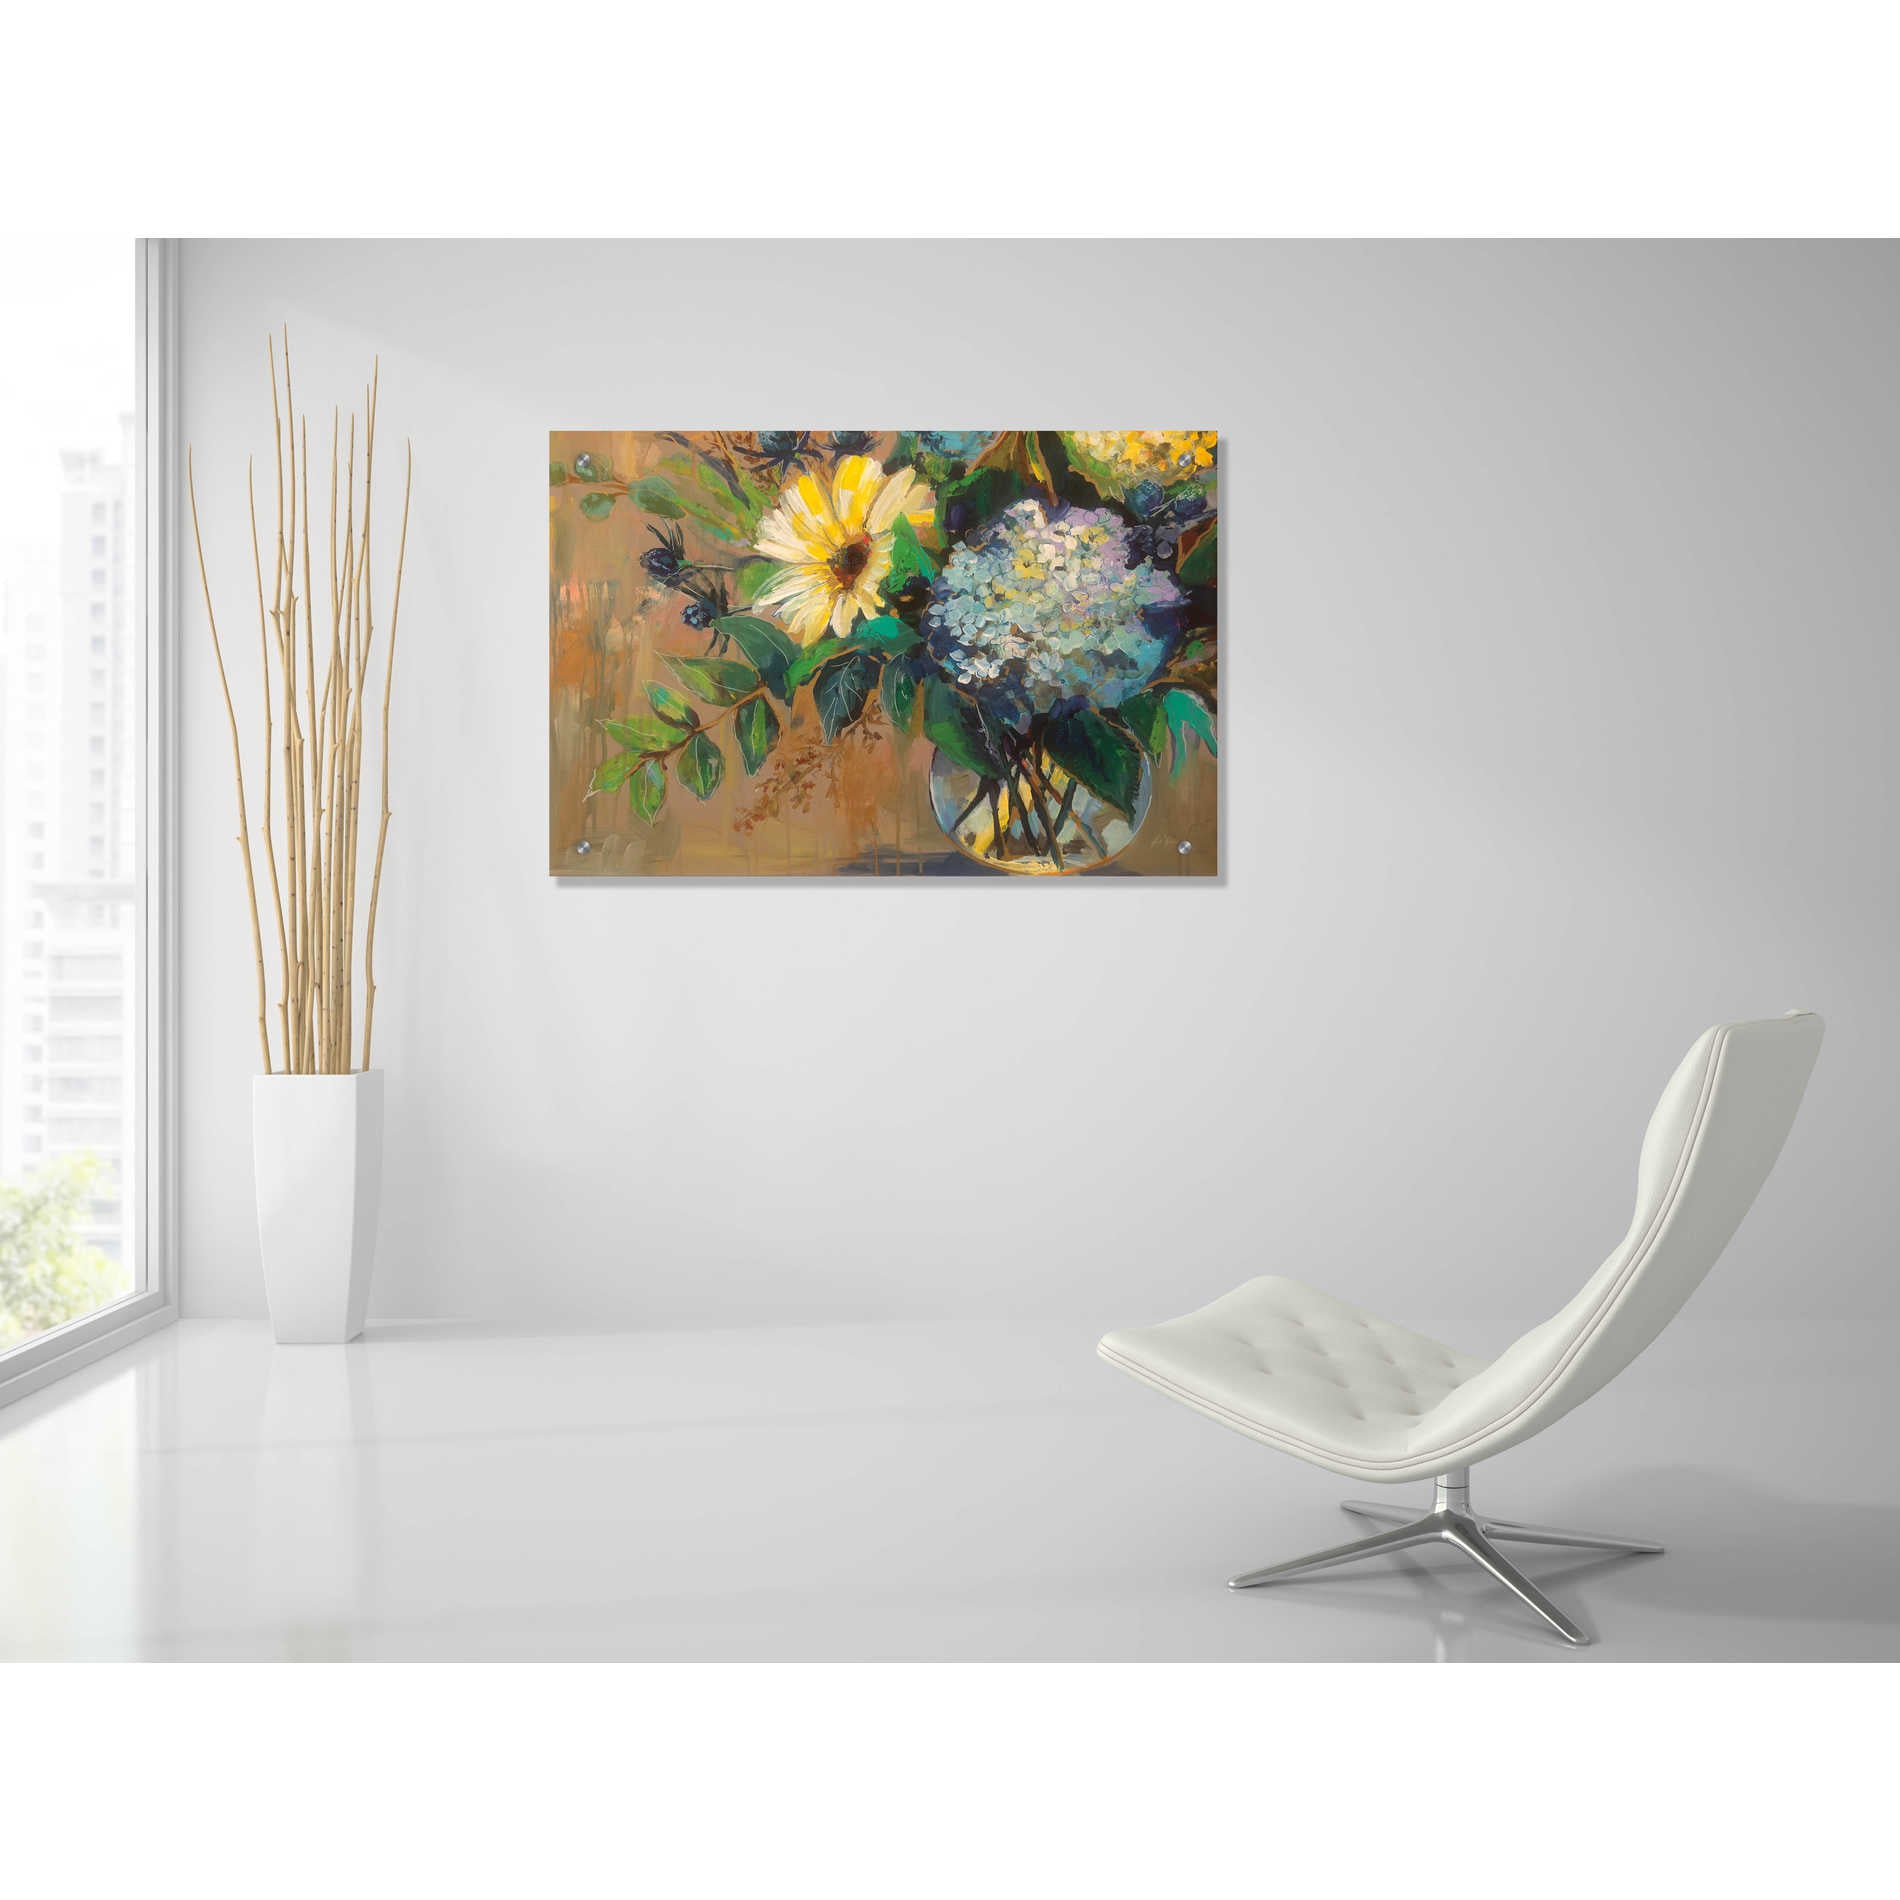 Epic Art 'Glass Floral' by Jeanette Vertentes, Acrylic Glass Wall Art,36x24